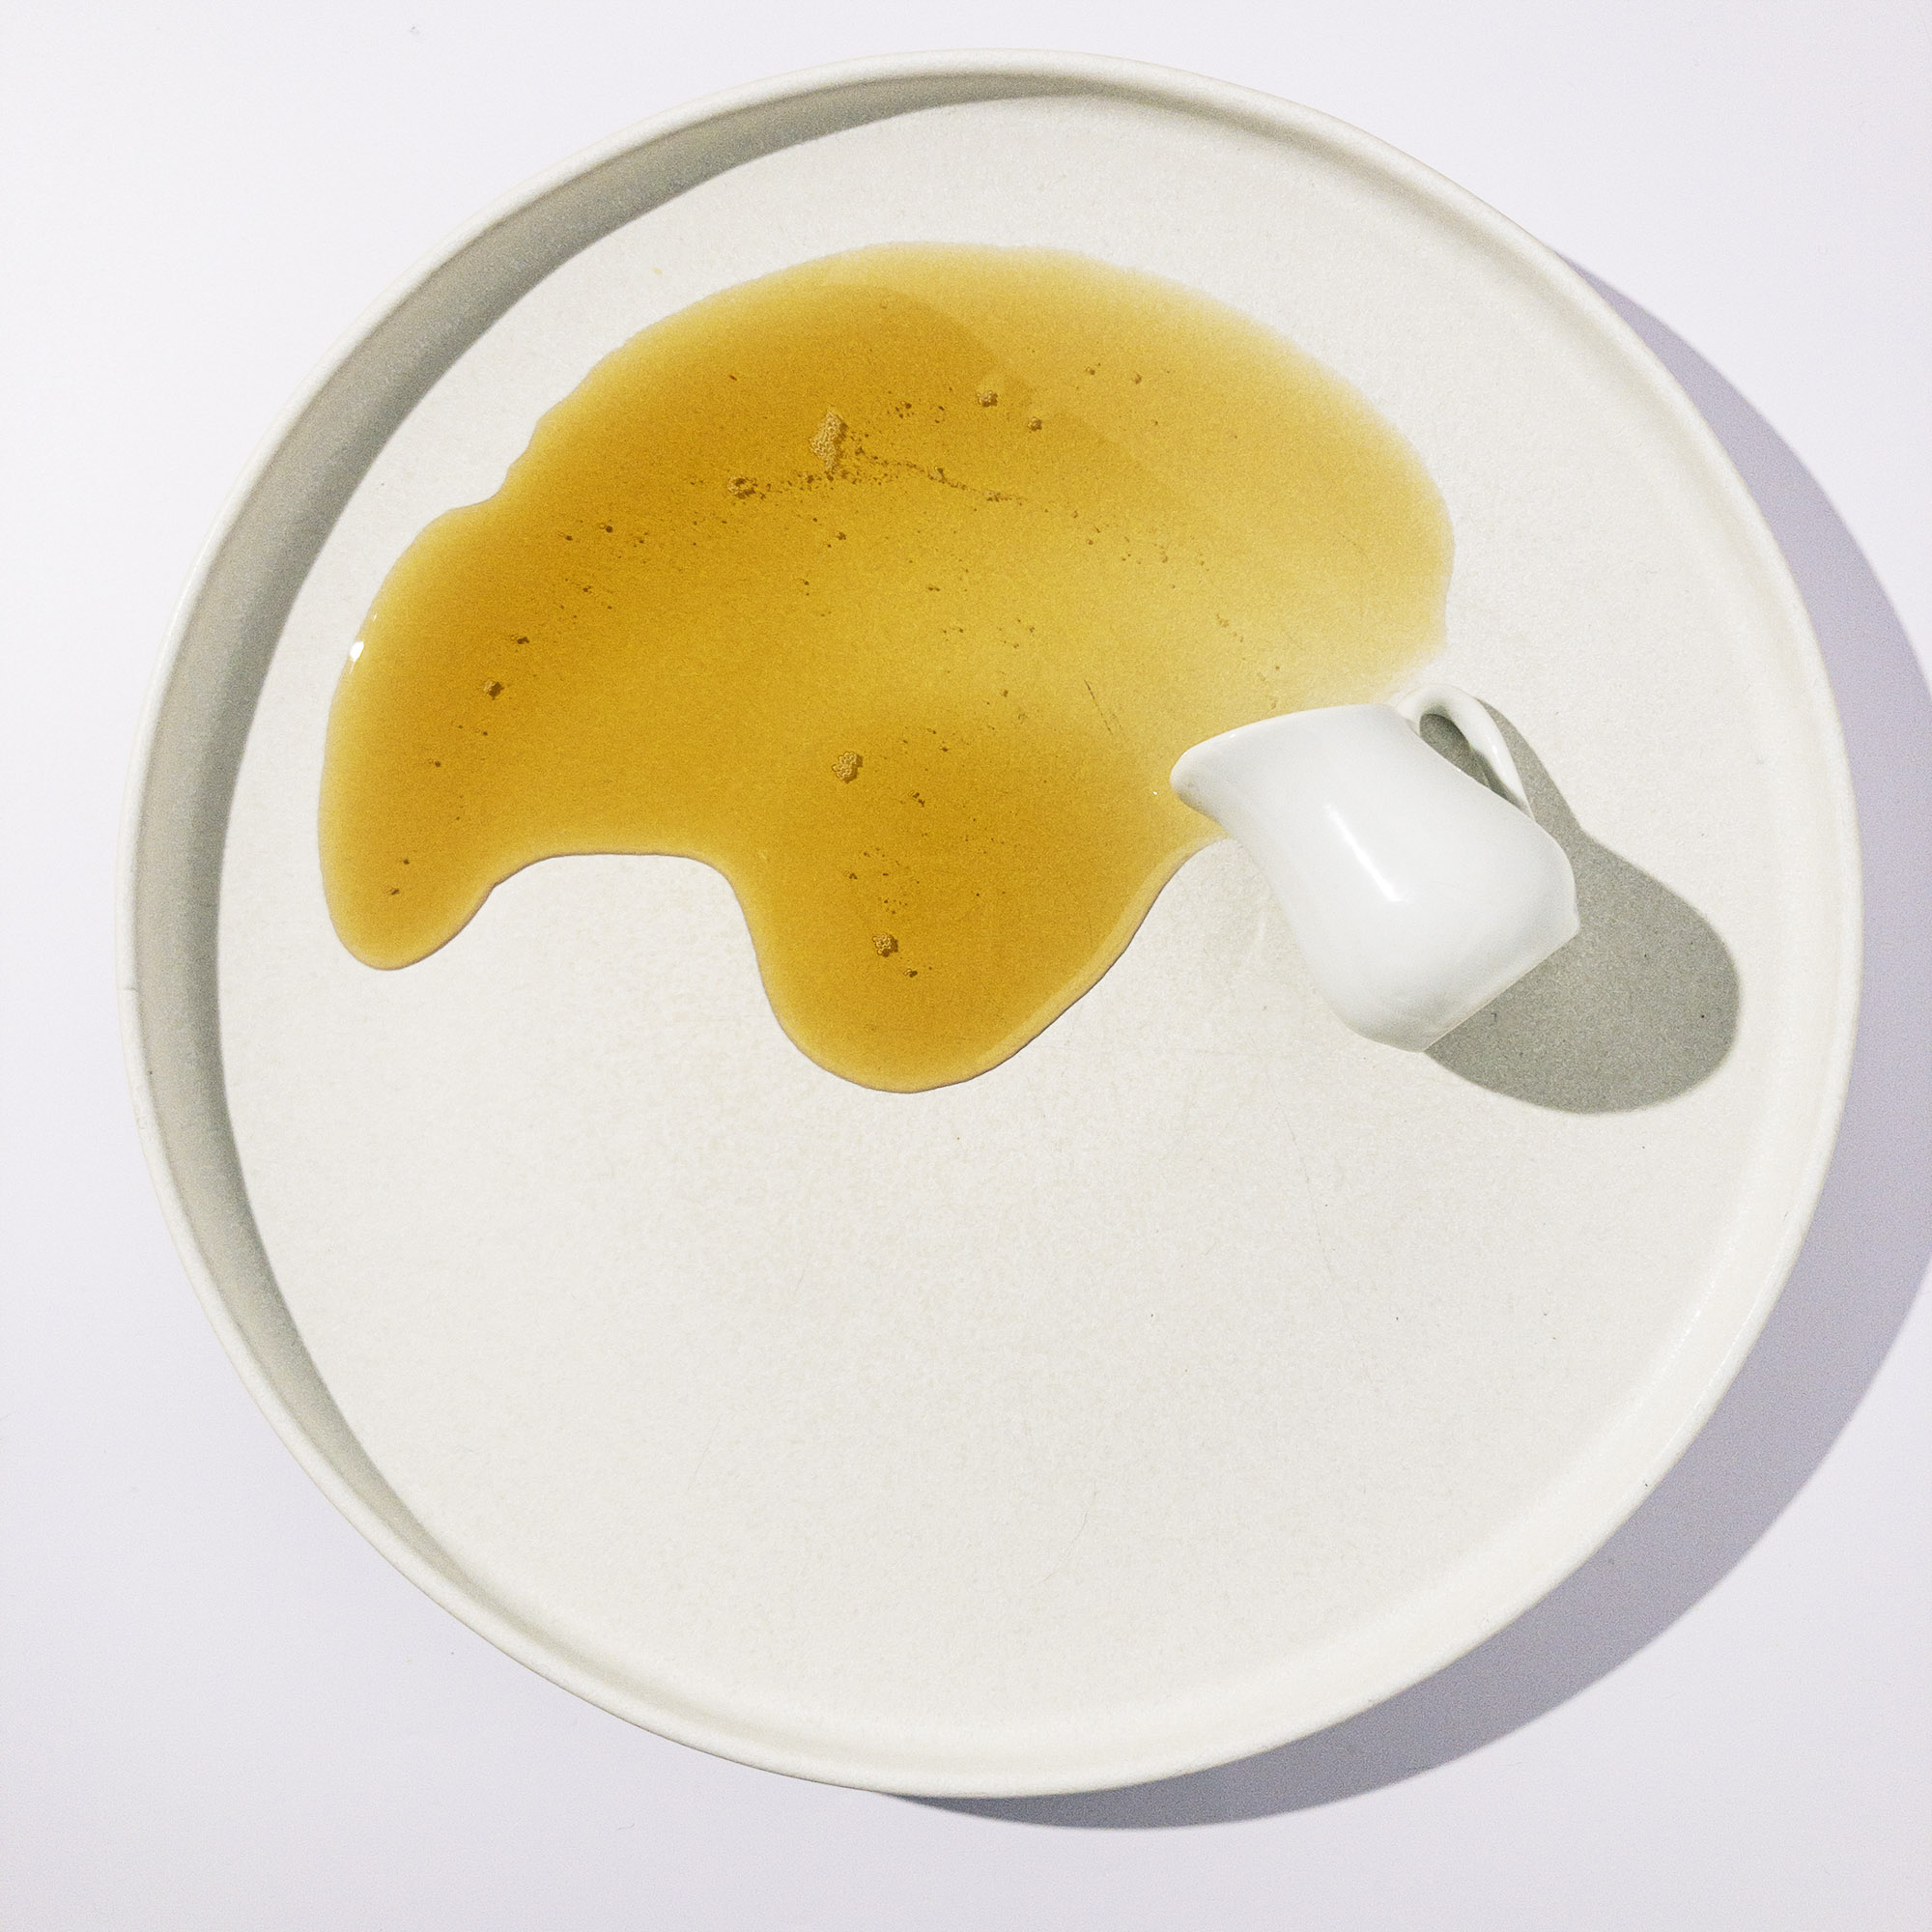 maple syrup pouring from a white jug, on a white plate